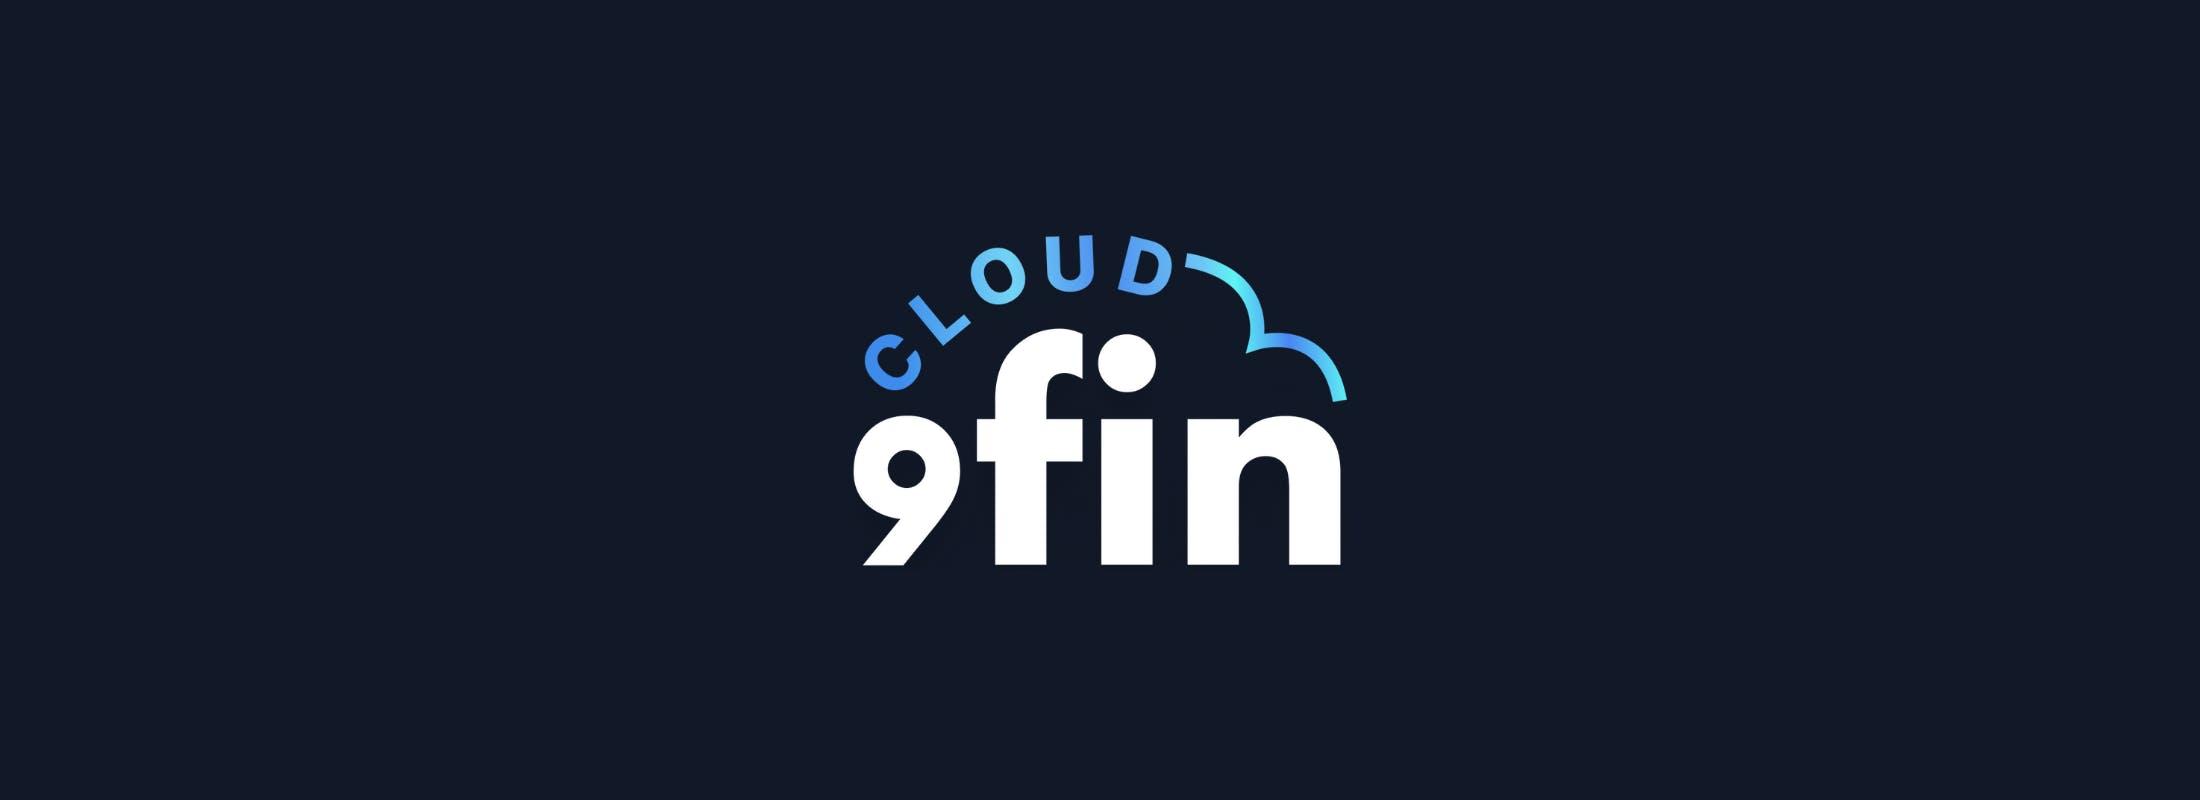 Cloud 9fin — Navigating the new paradigm with Rob Fawn of PGIM